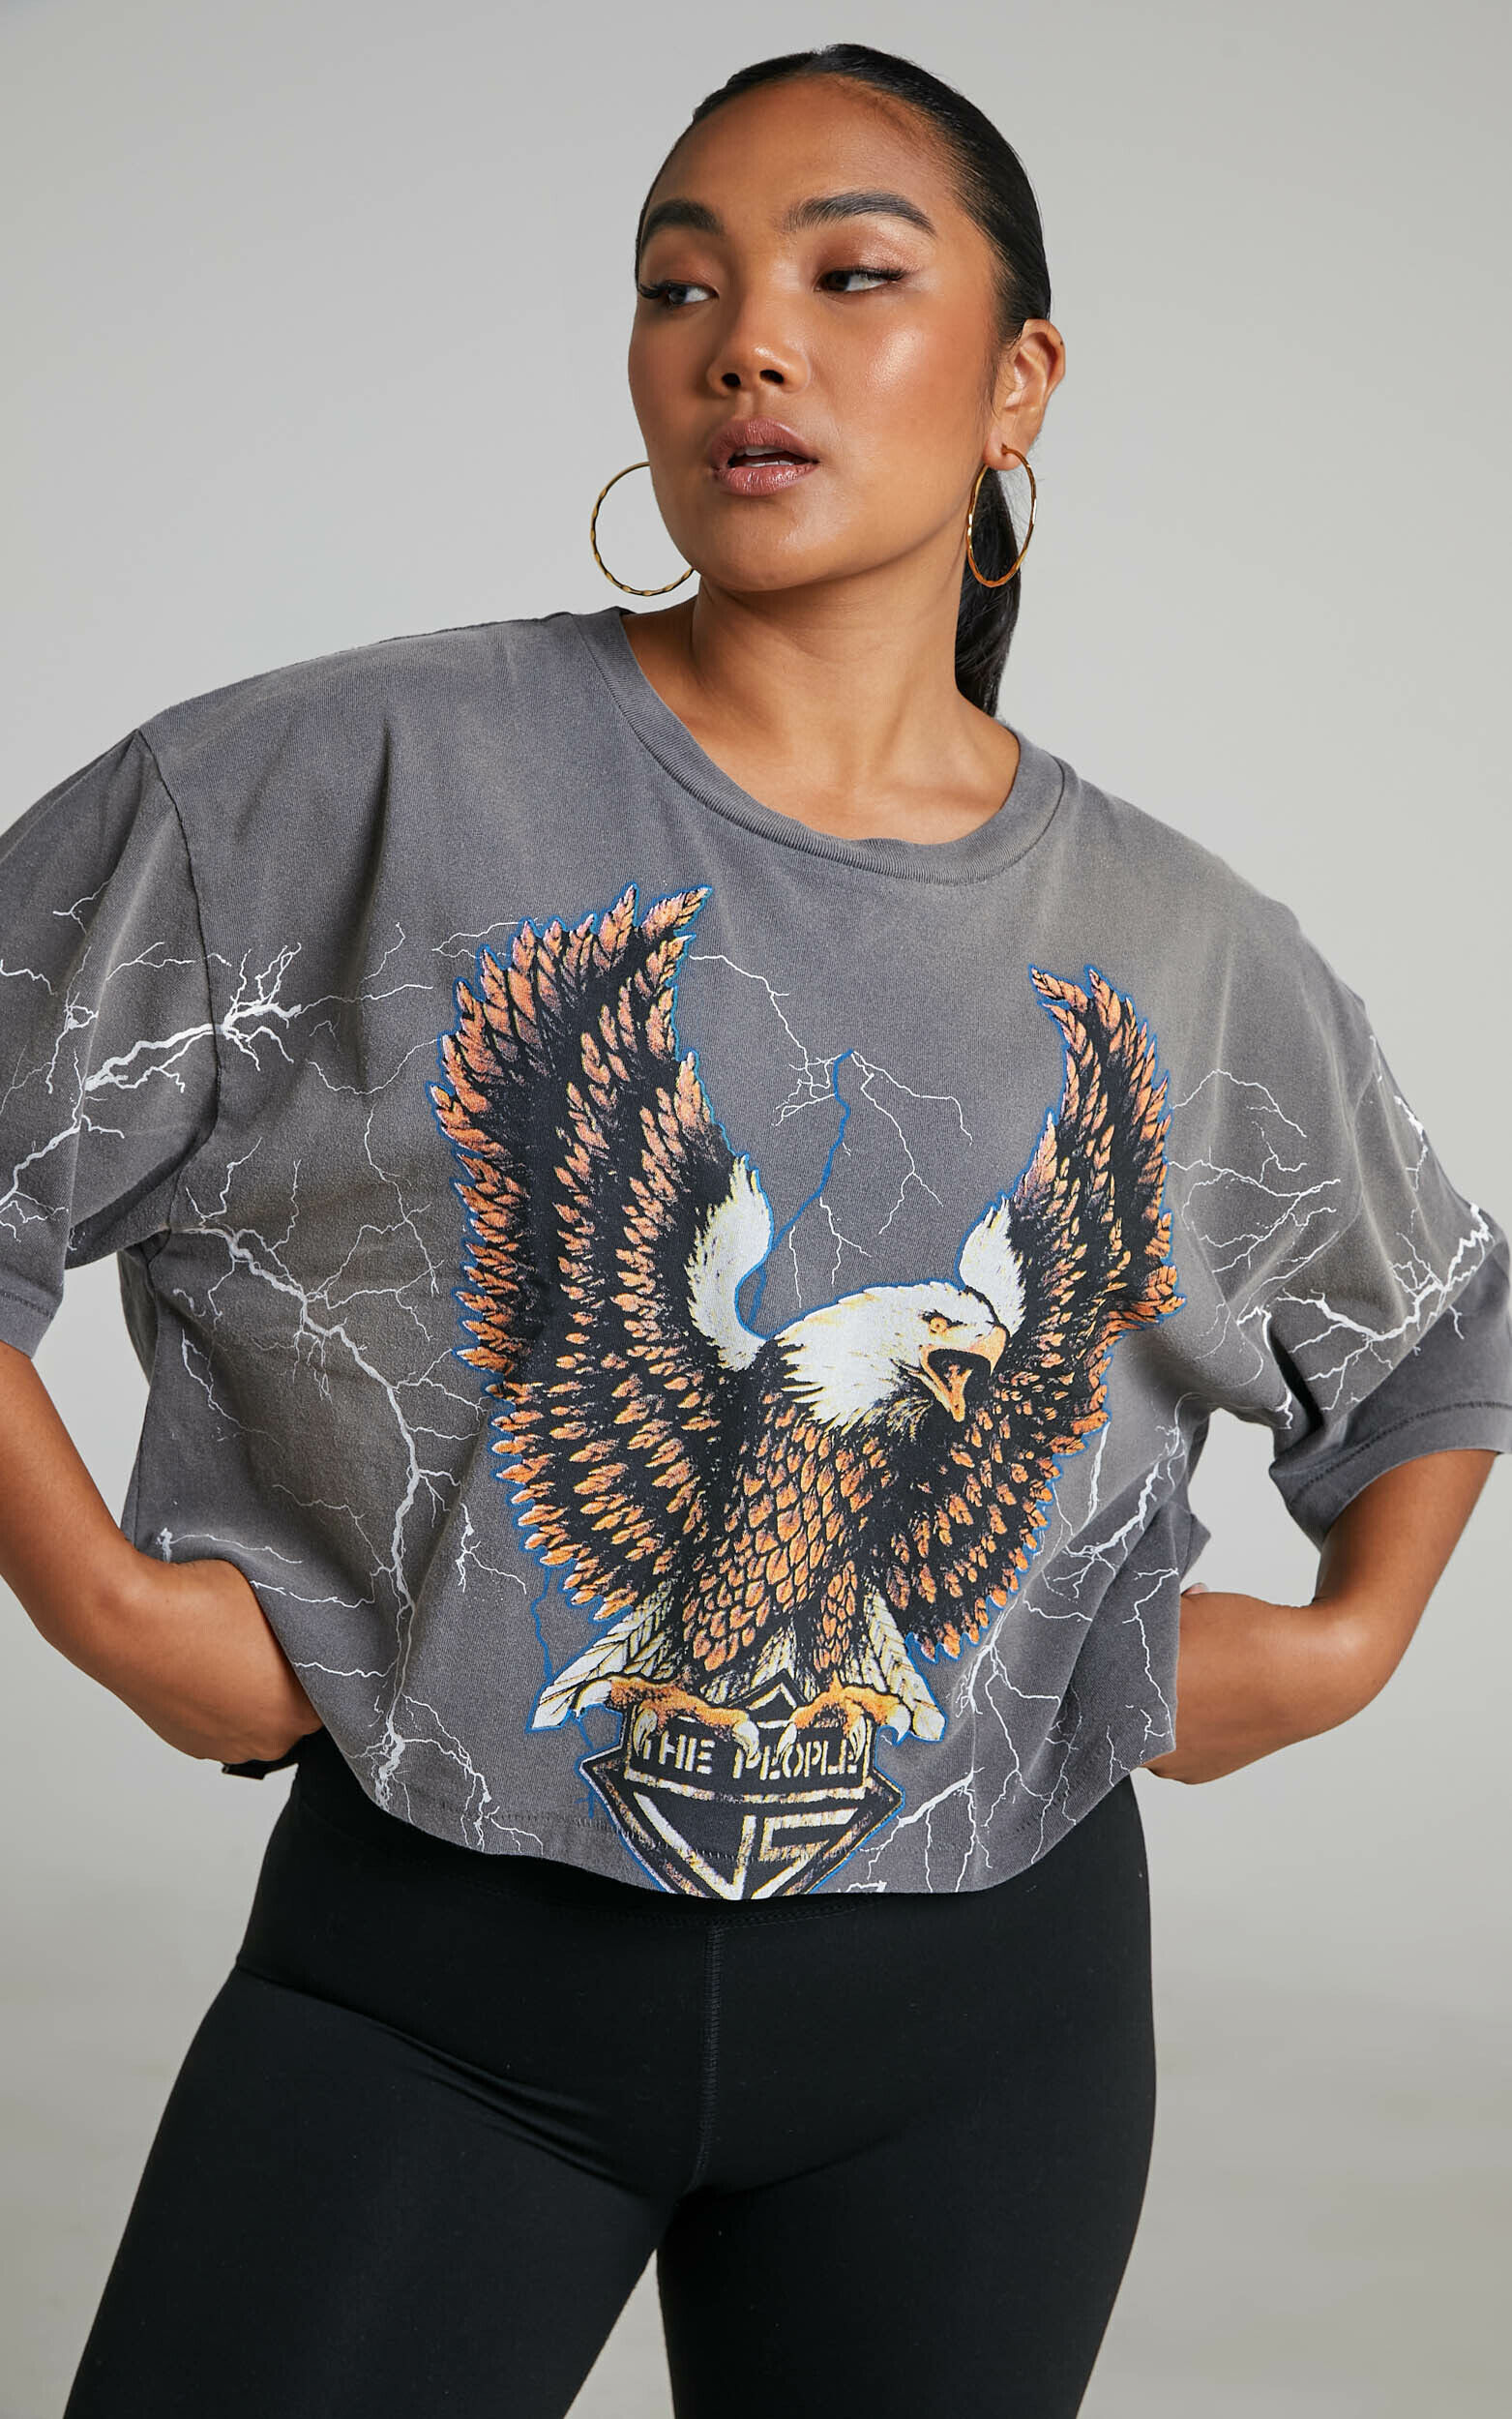 The People Vs - Eagle Storm Helena Tee in Smashed Black - L, BLK1